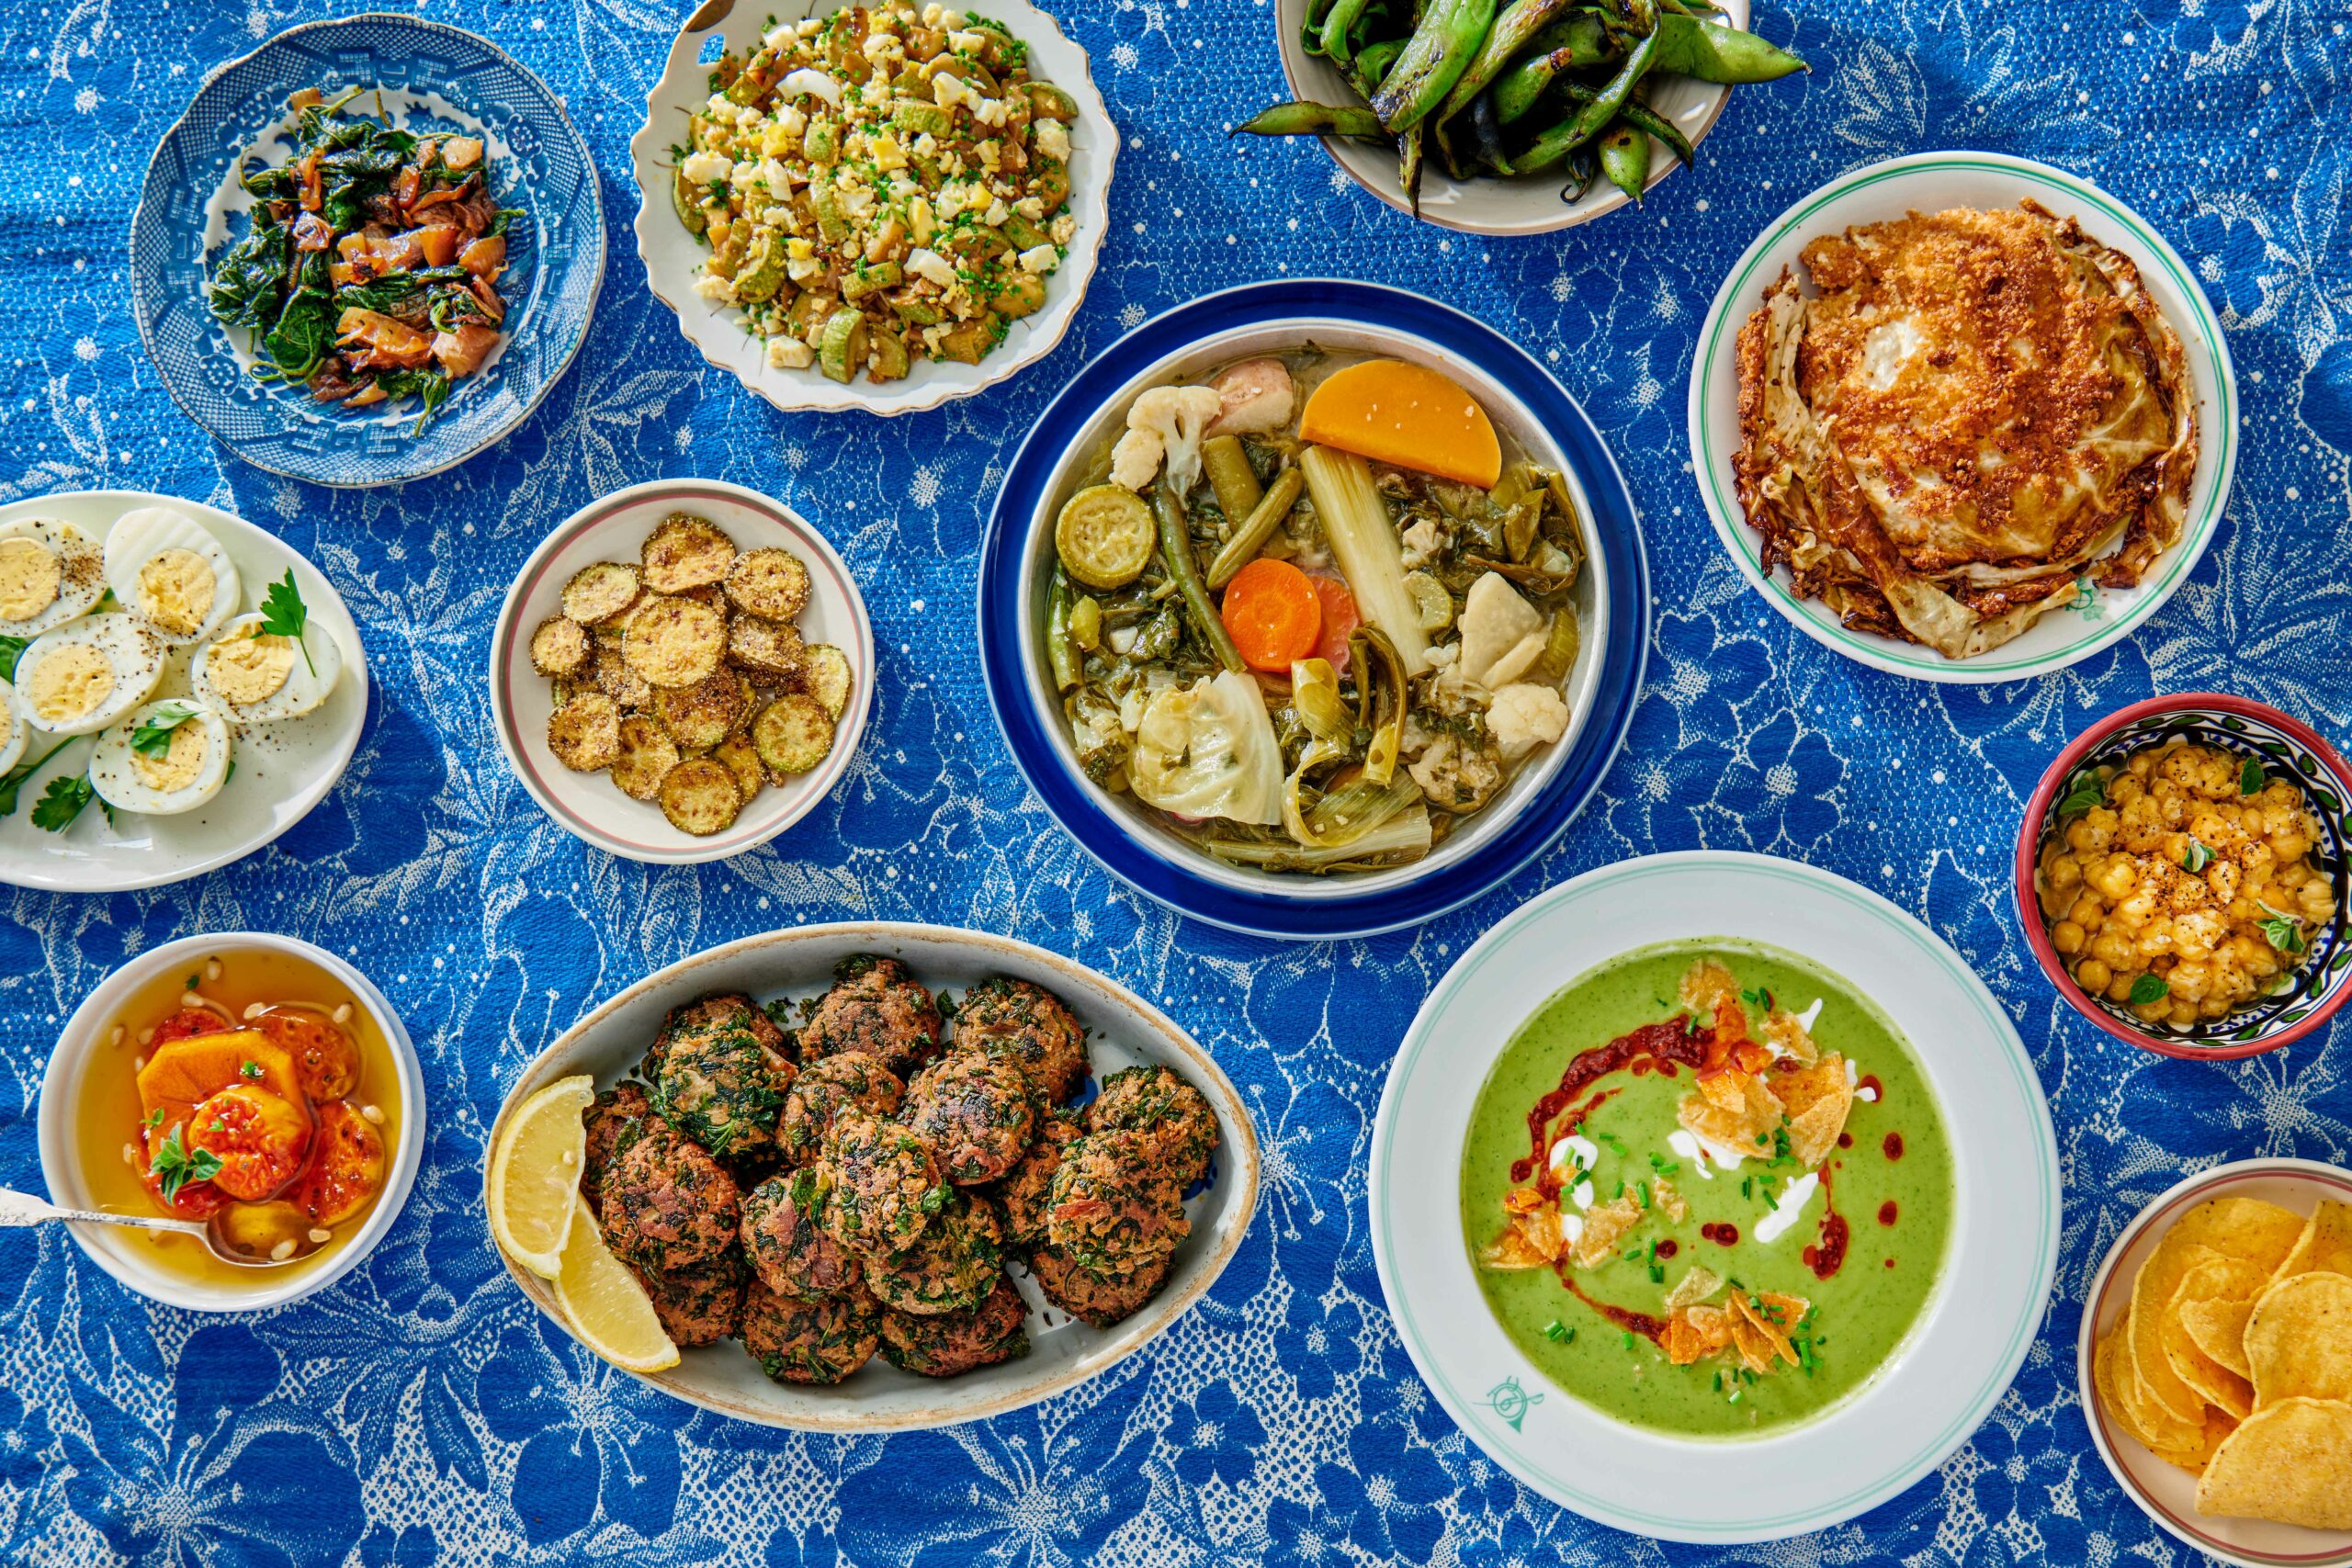 Vegetable recipes in various bowls on blue floral tablecloth